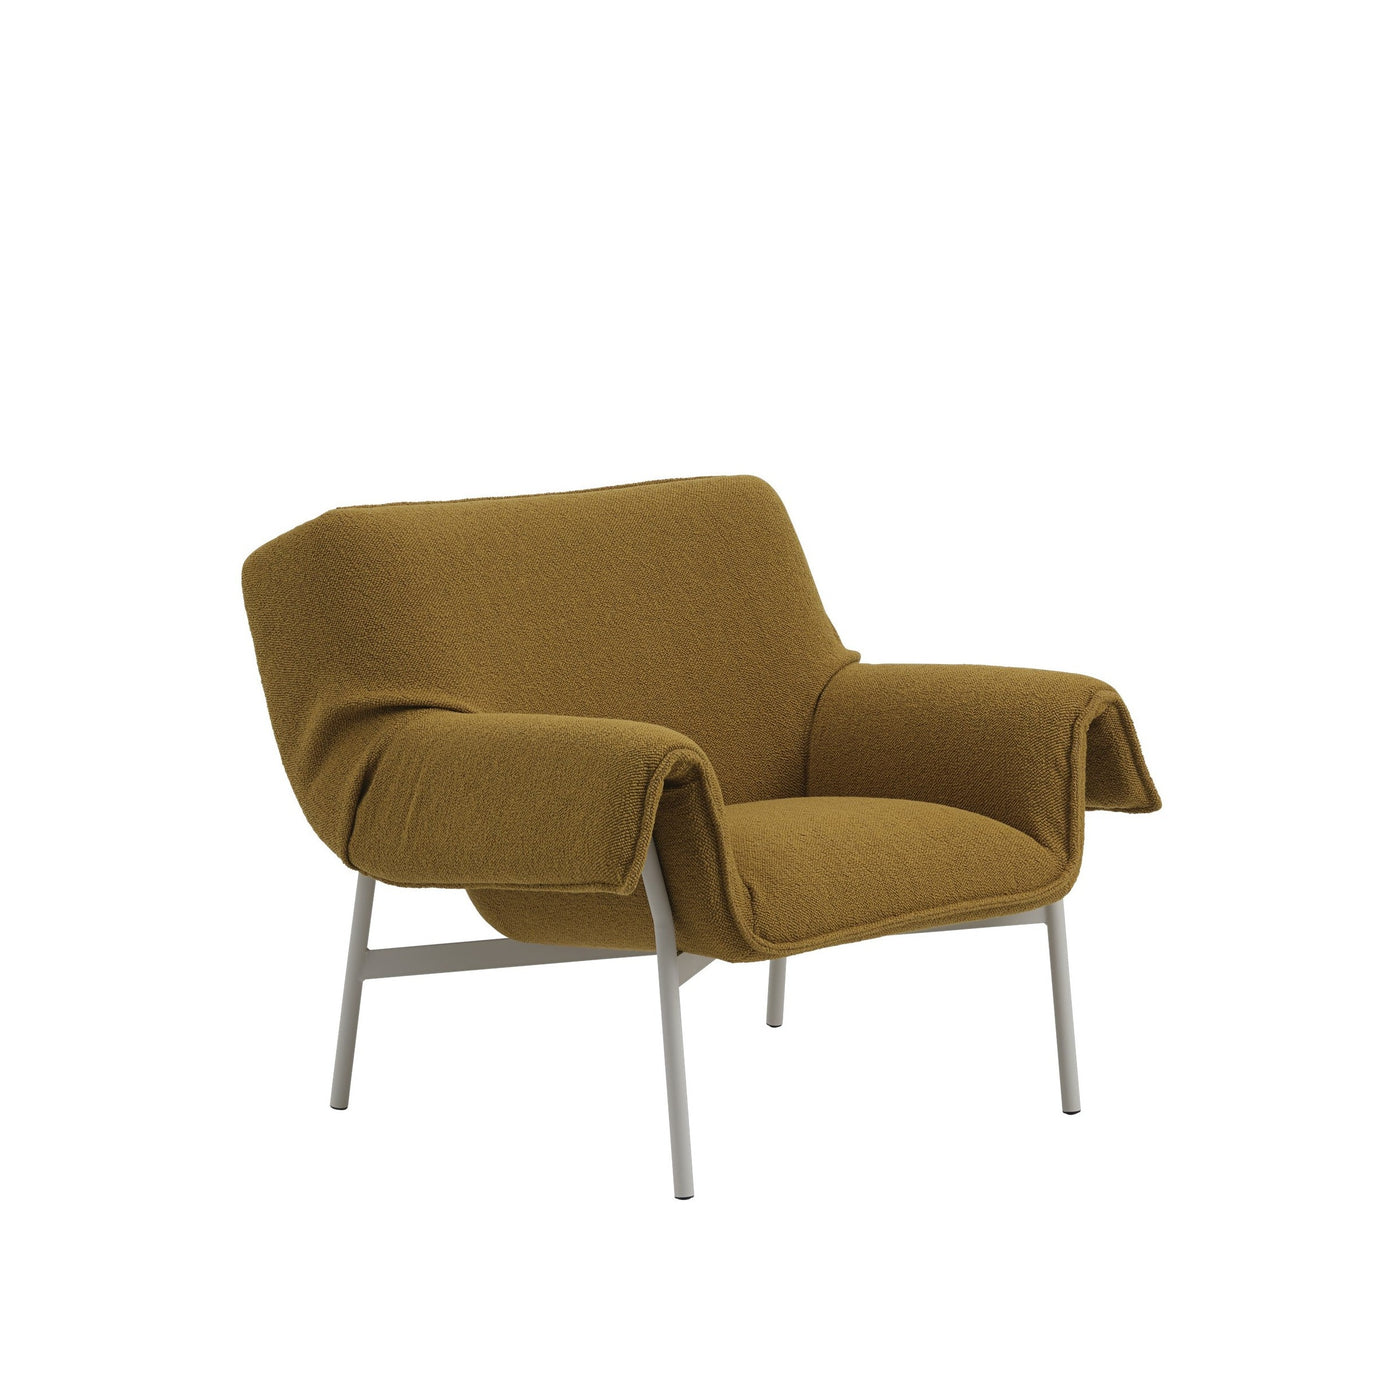 Muuto Wrap Lounge Chair. Made to order from someday designs. #colour_hearth-008